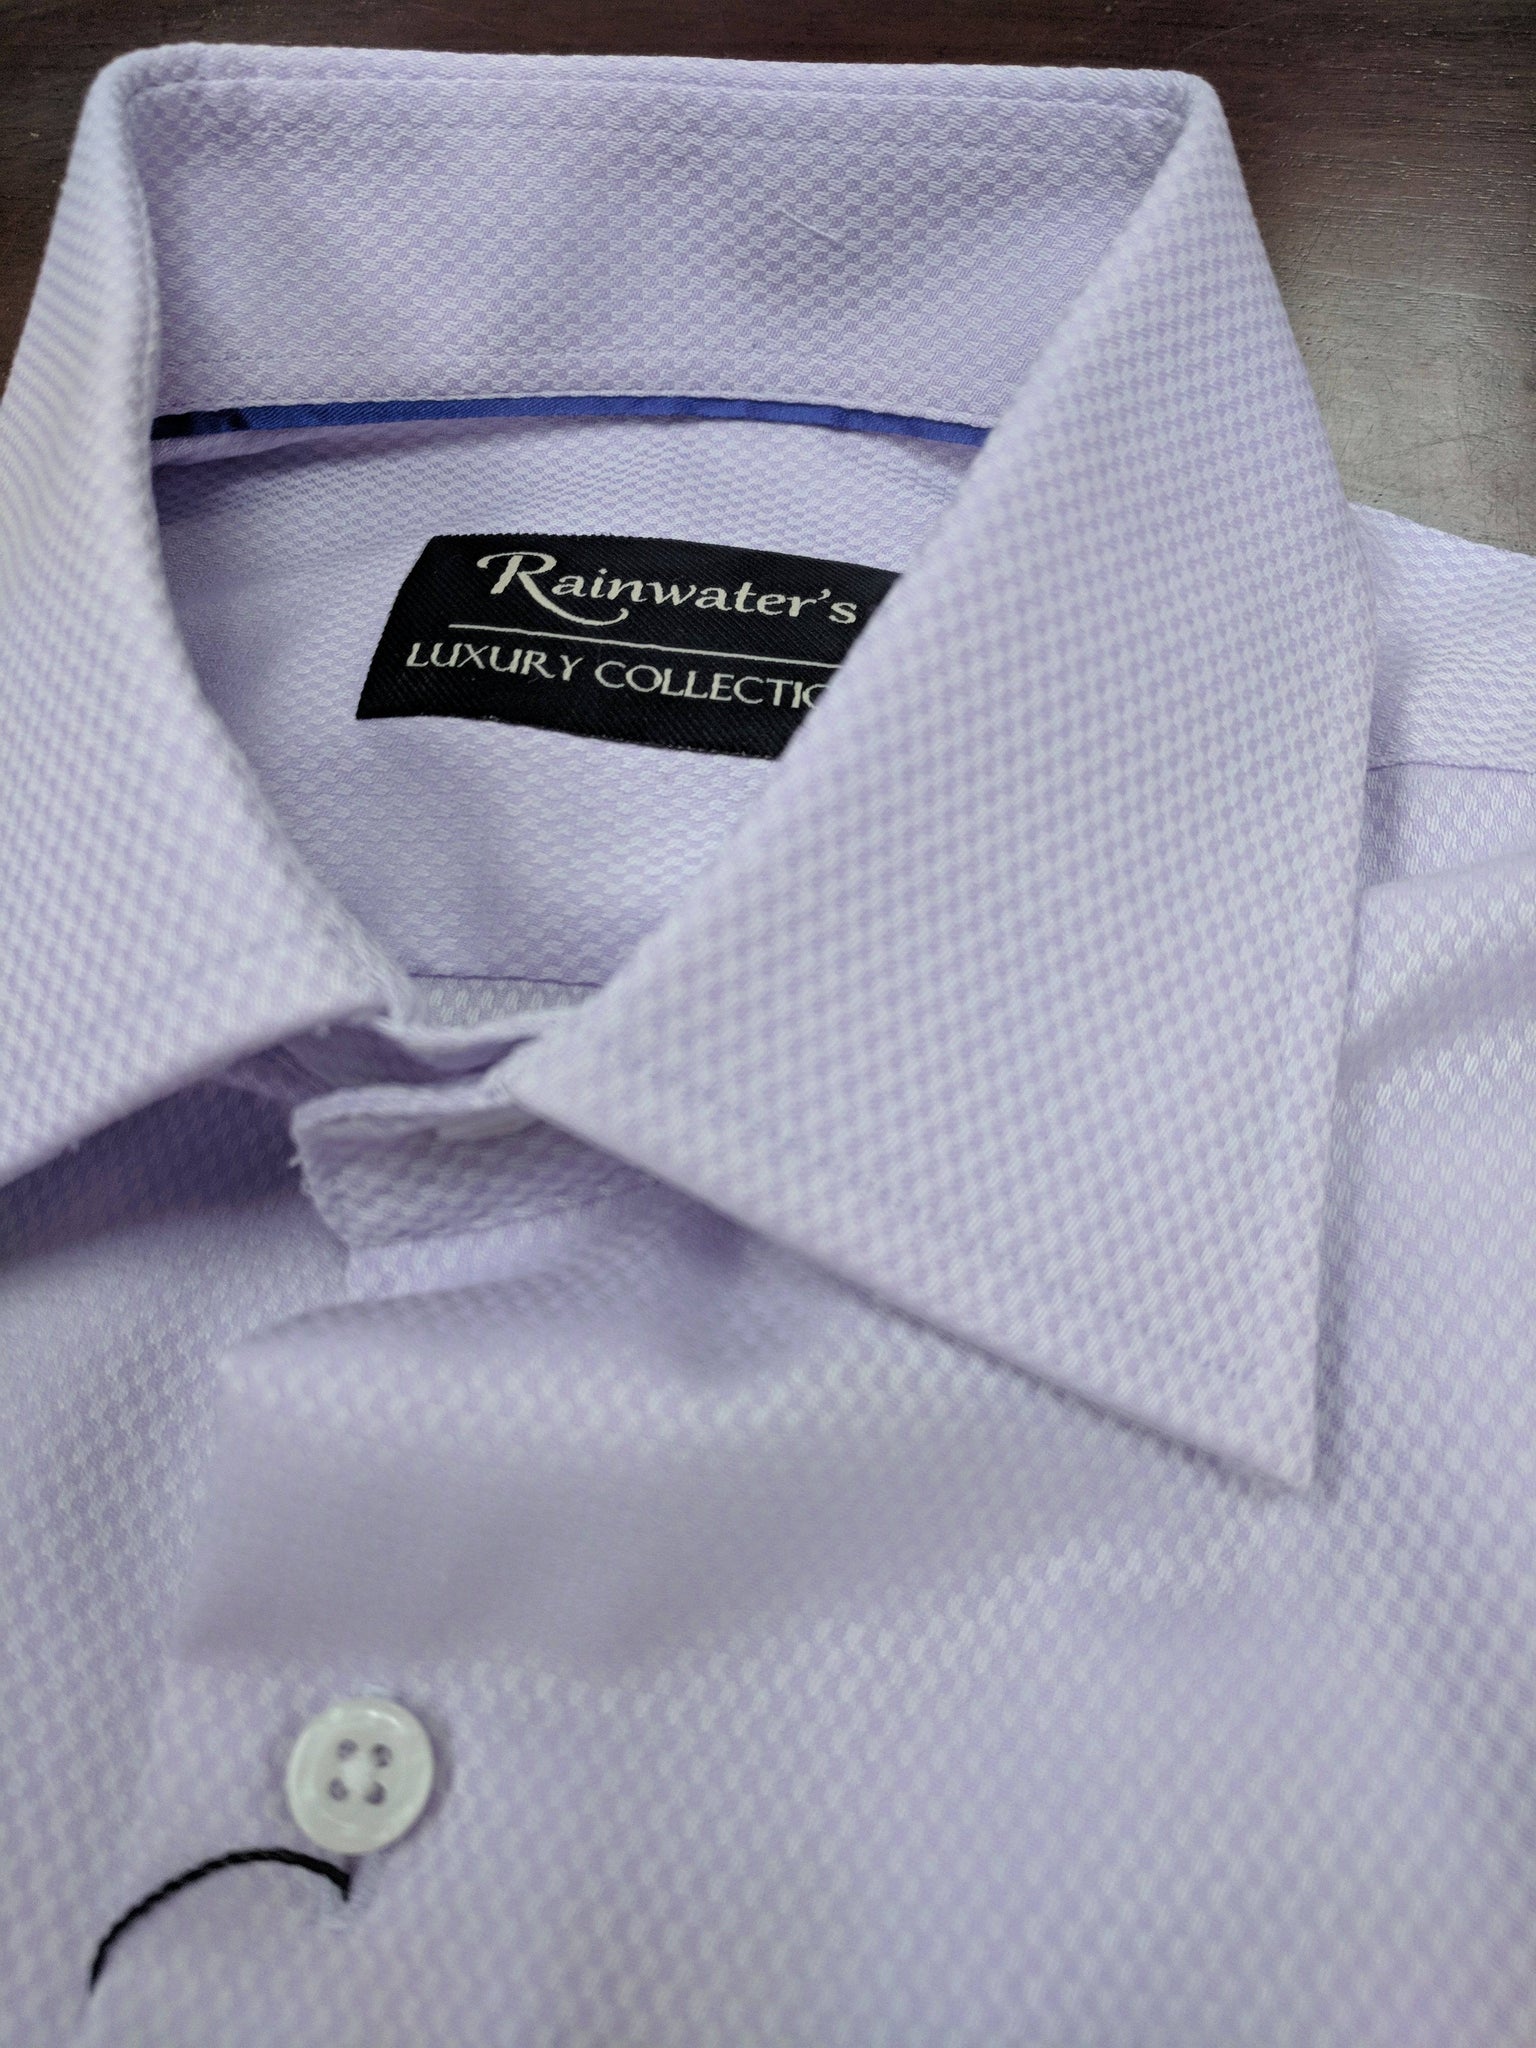 Rainwater's Lavender Royal Oxford 100% Cotton, Classic Fit, Button Cuff, Spread Collar - Dress shirt - Rainwater's Men's Clothing and Tuxedo Rental